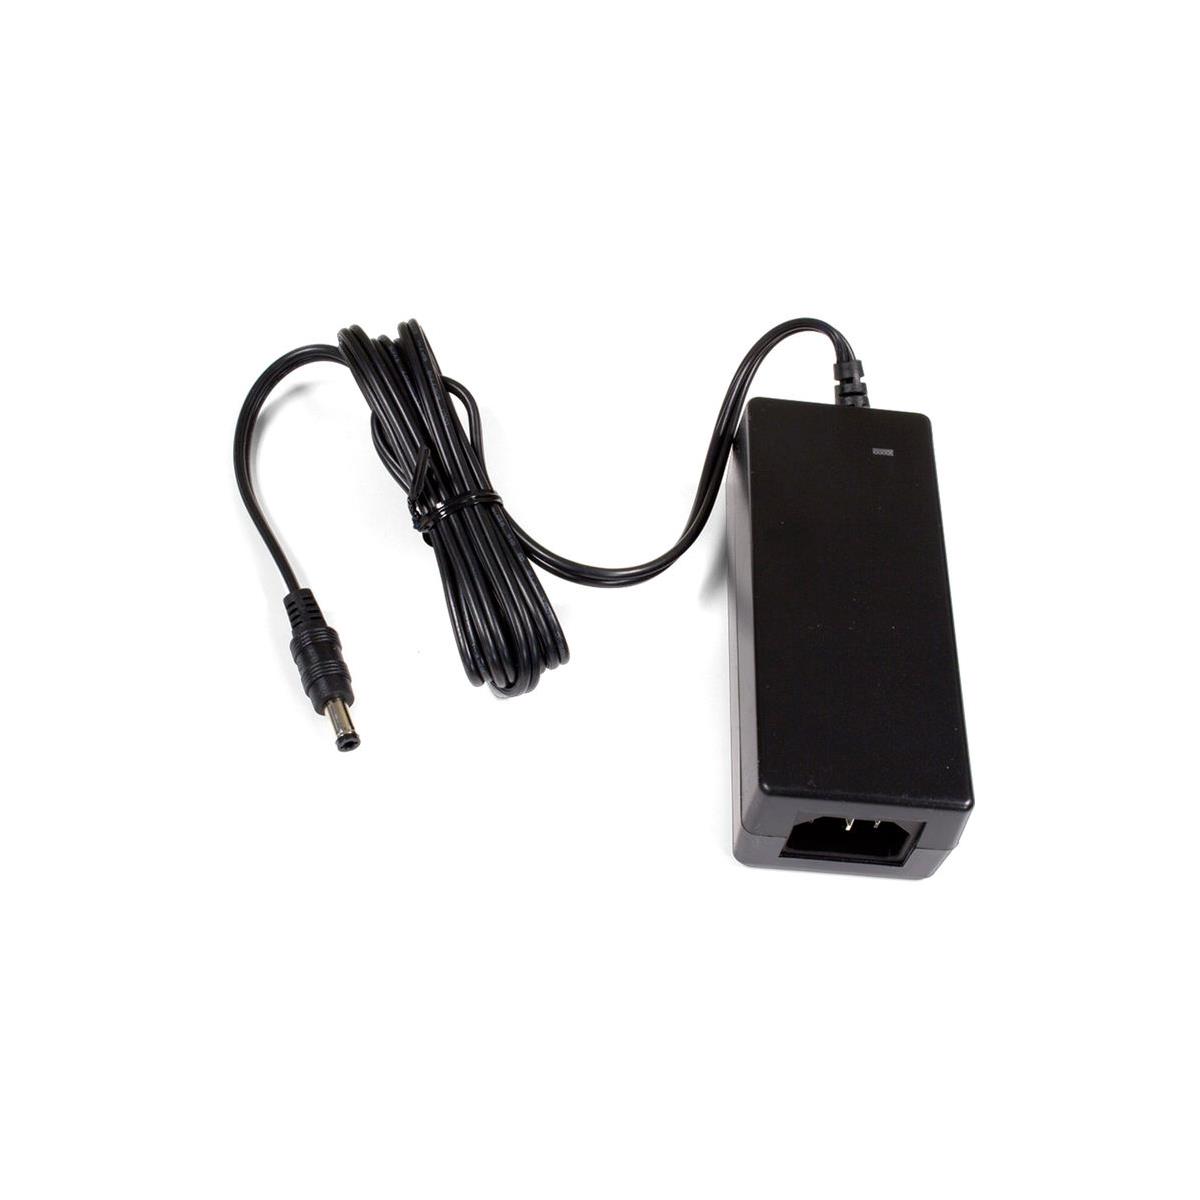 Image of ATTO Technology Locking Power Supply Kit for Thunderbolt Devices